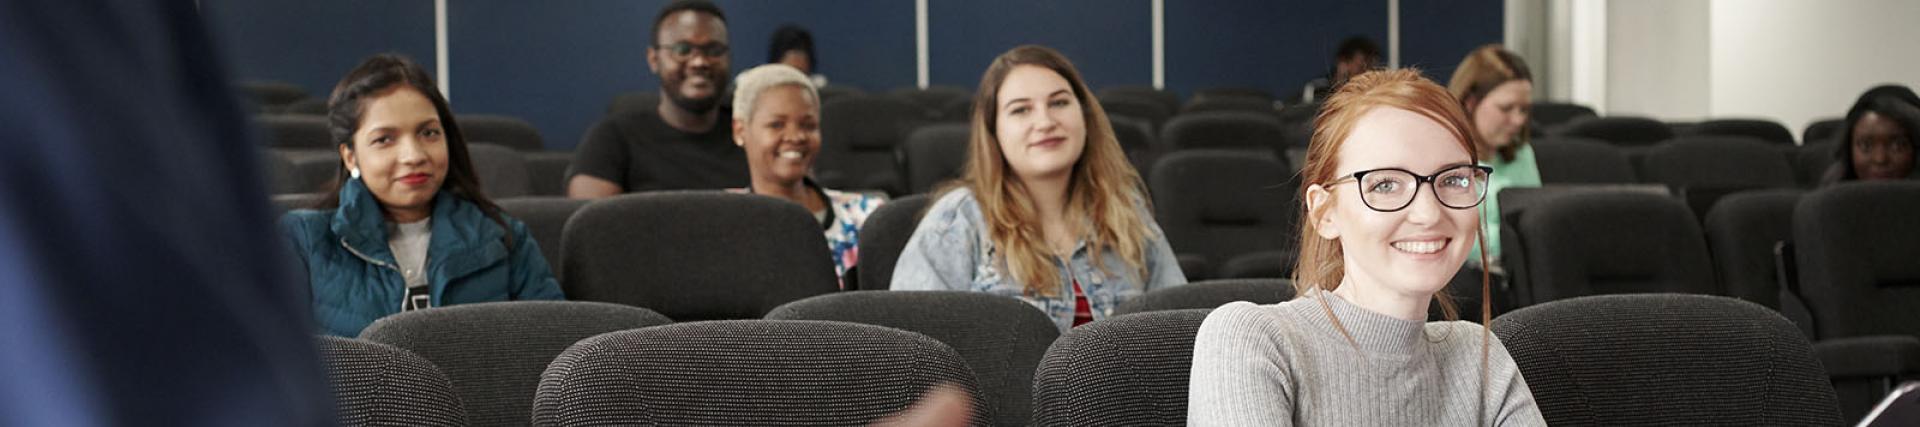 A group of students smiling during a lecture